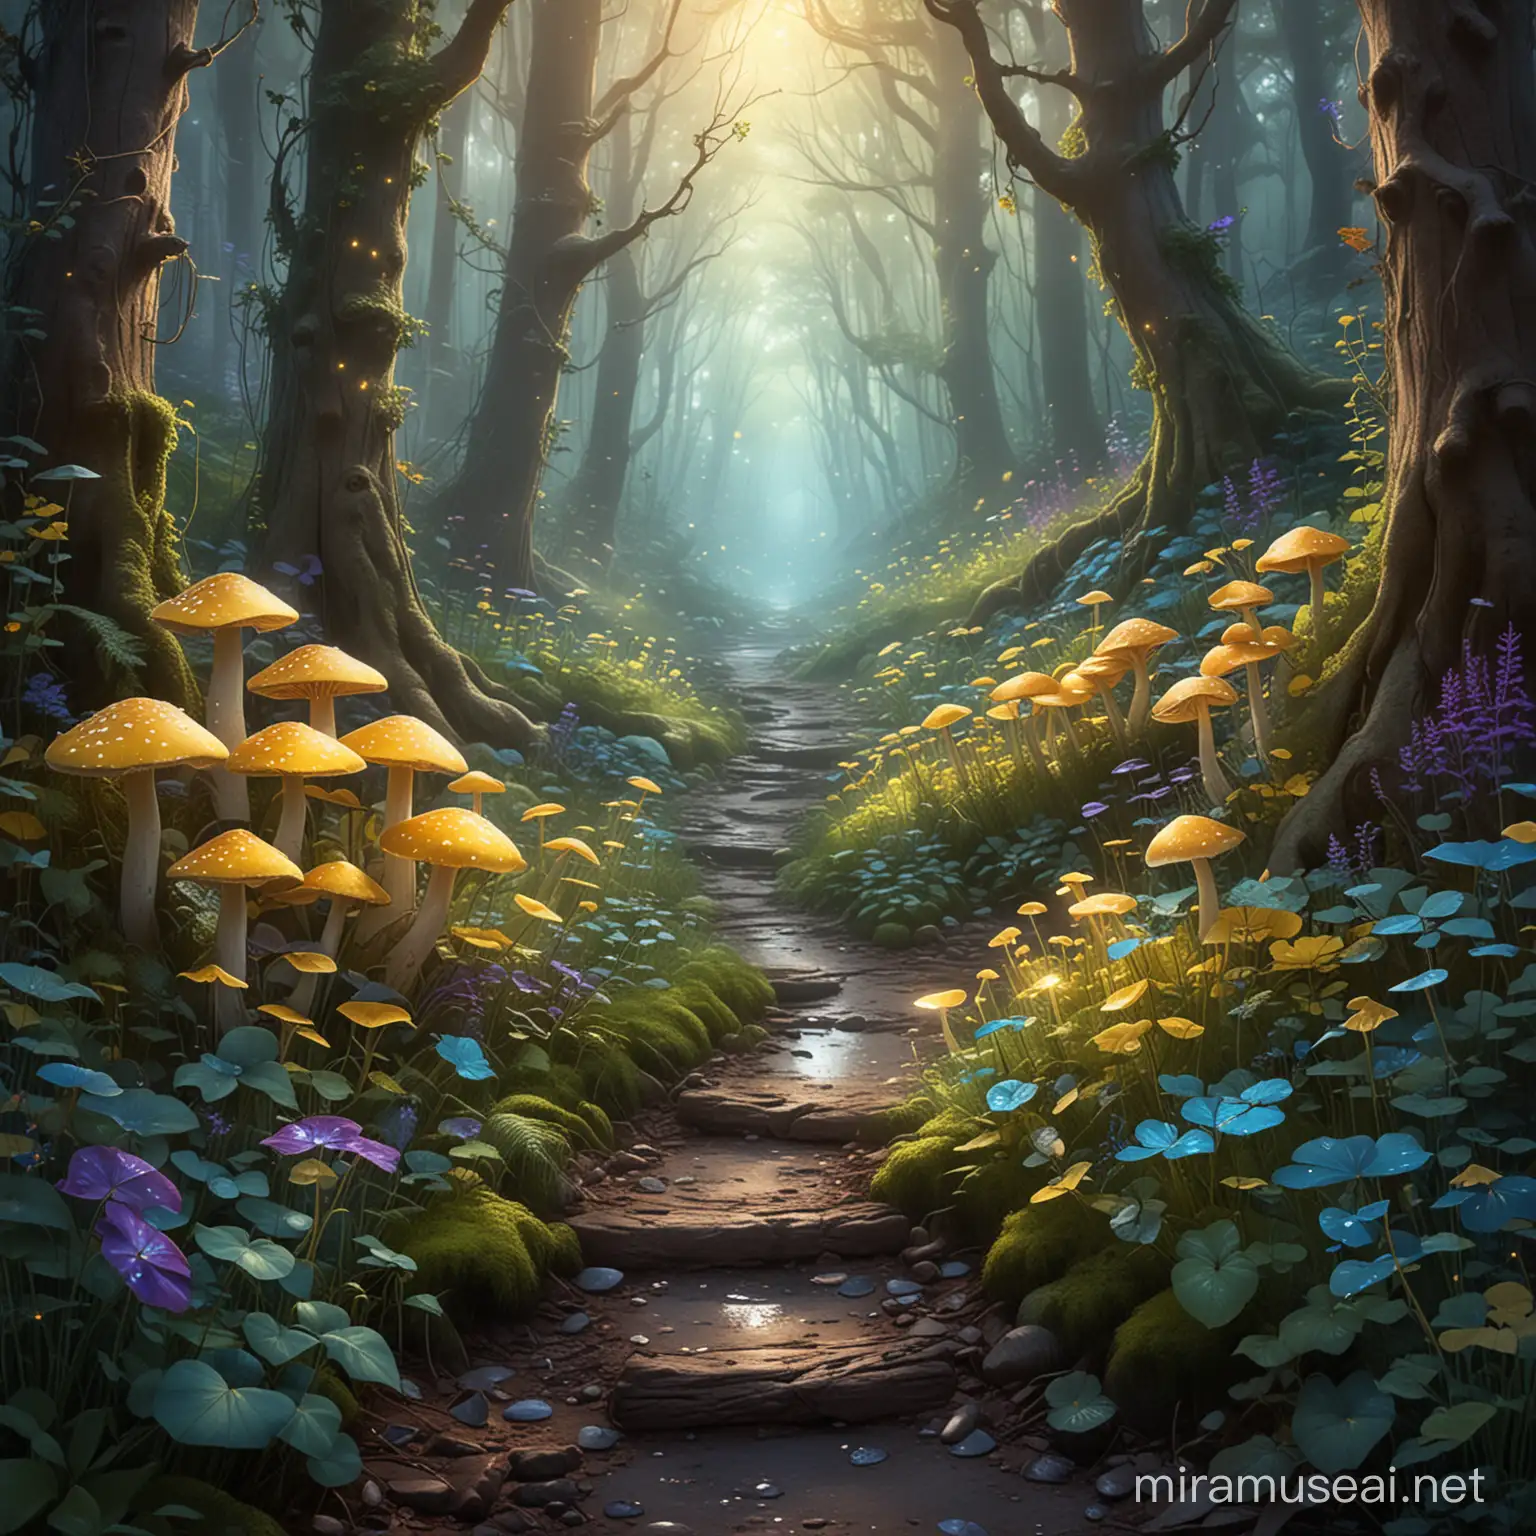 Create an enchanting digital painting of a hidden path that winds through an ancient forest, illuminated by glowing mushrooms and faint, ethereal light  filtering through dense foliage, and fairies in different lighted colors of yellow, blue, green, purple flittering around leading to a secret garden unseen by the outside world."
